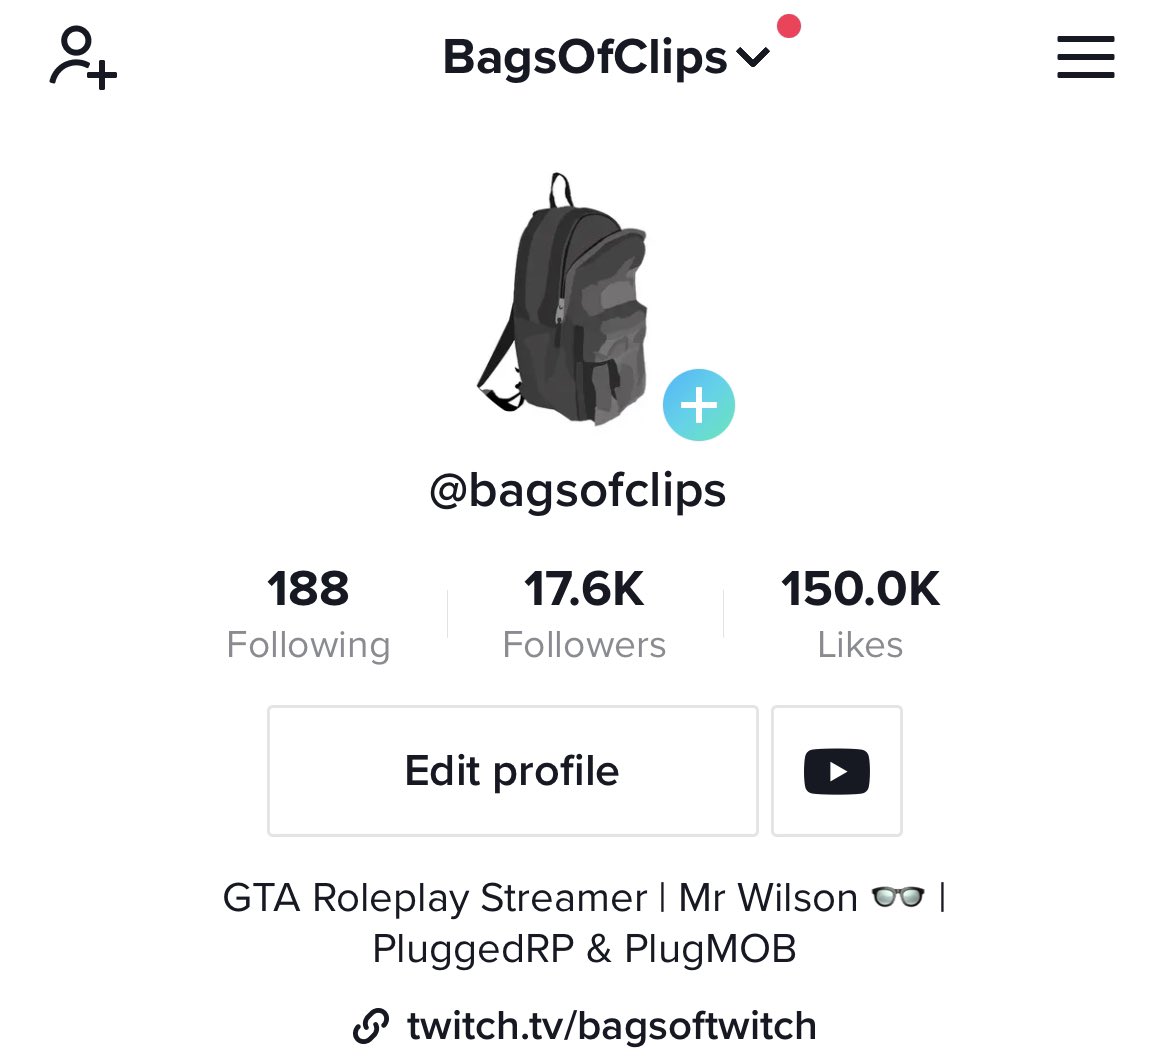 Thanks to everyone who’s been supporting me throughout this journey! 150K likes #feelsgoodman

Gonna be taking a few days off streaming - will be back on Thursday night & hopefully again Saturday before I go on holiday for a week. See you in the next one! ♥️🎒 #PluggedRP #PlugMOB